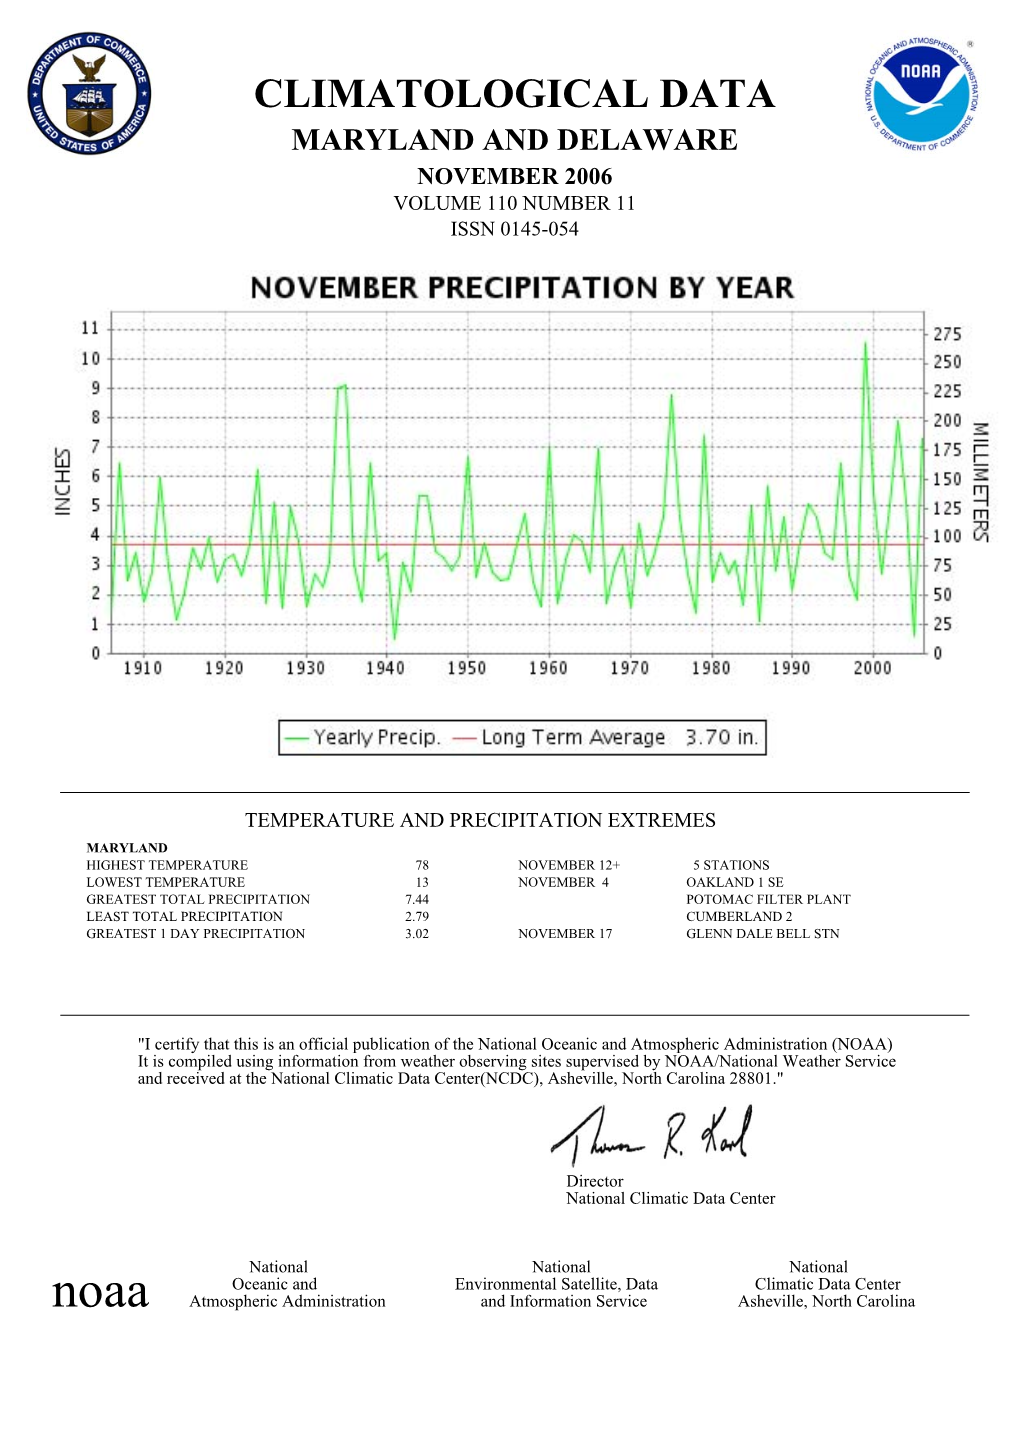 CD Publications Summmarize Temperature, Relative Humidity, Precipitation, Cloudiness, Wind Speed and Direction Observations for Several Hundred Cities in the U.S